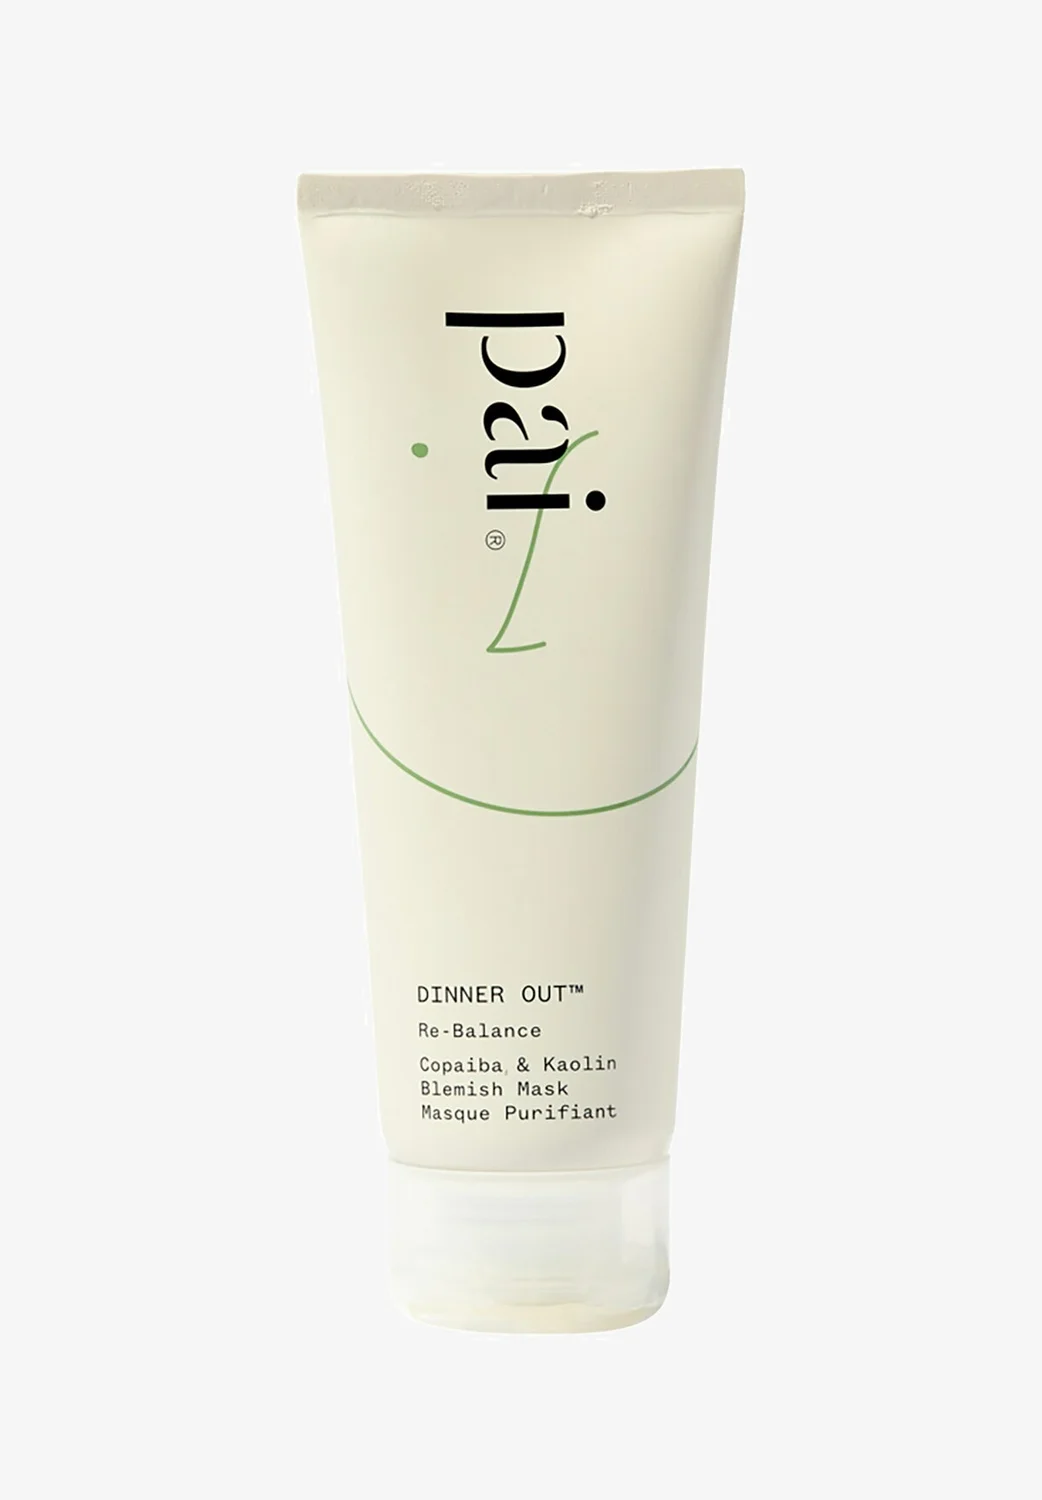 A tube of Psi Dinner Out face mask.